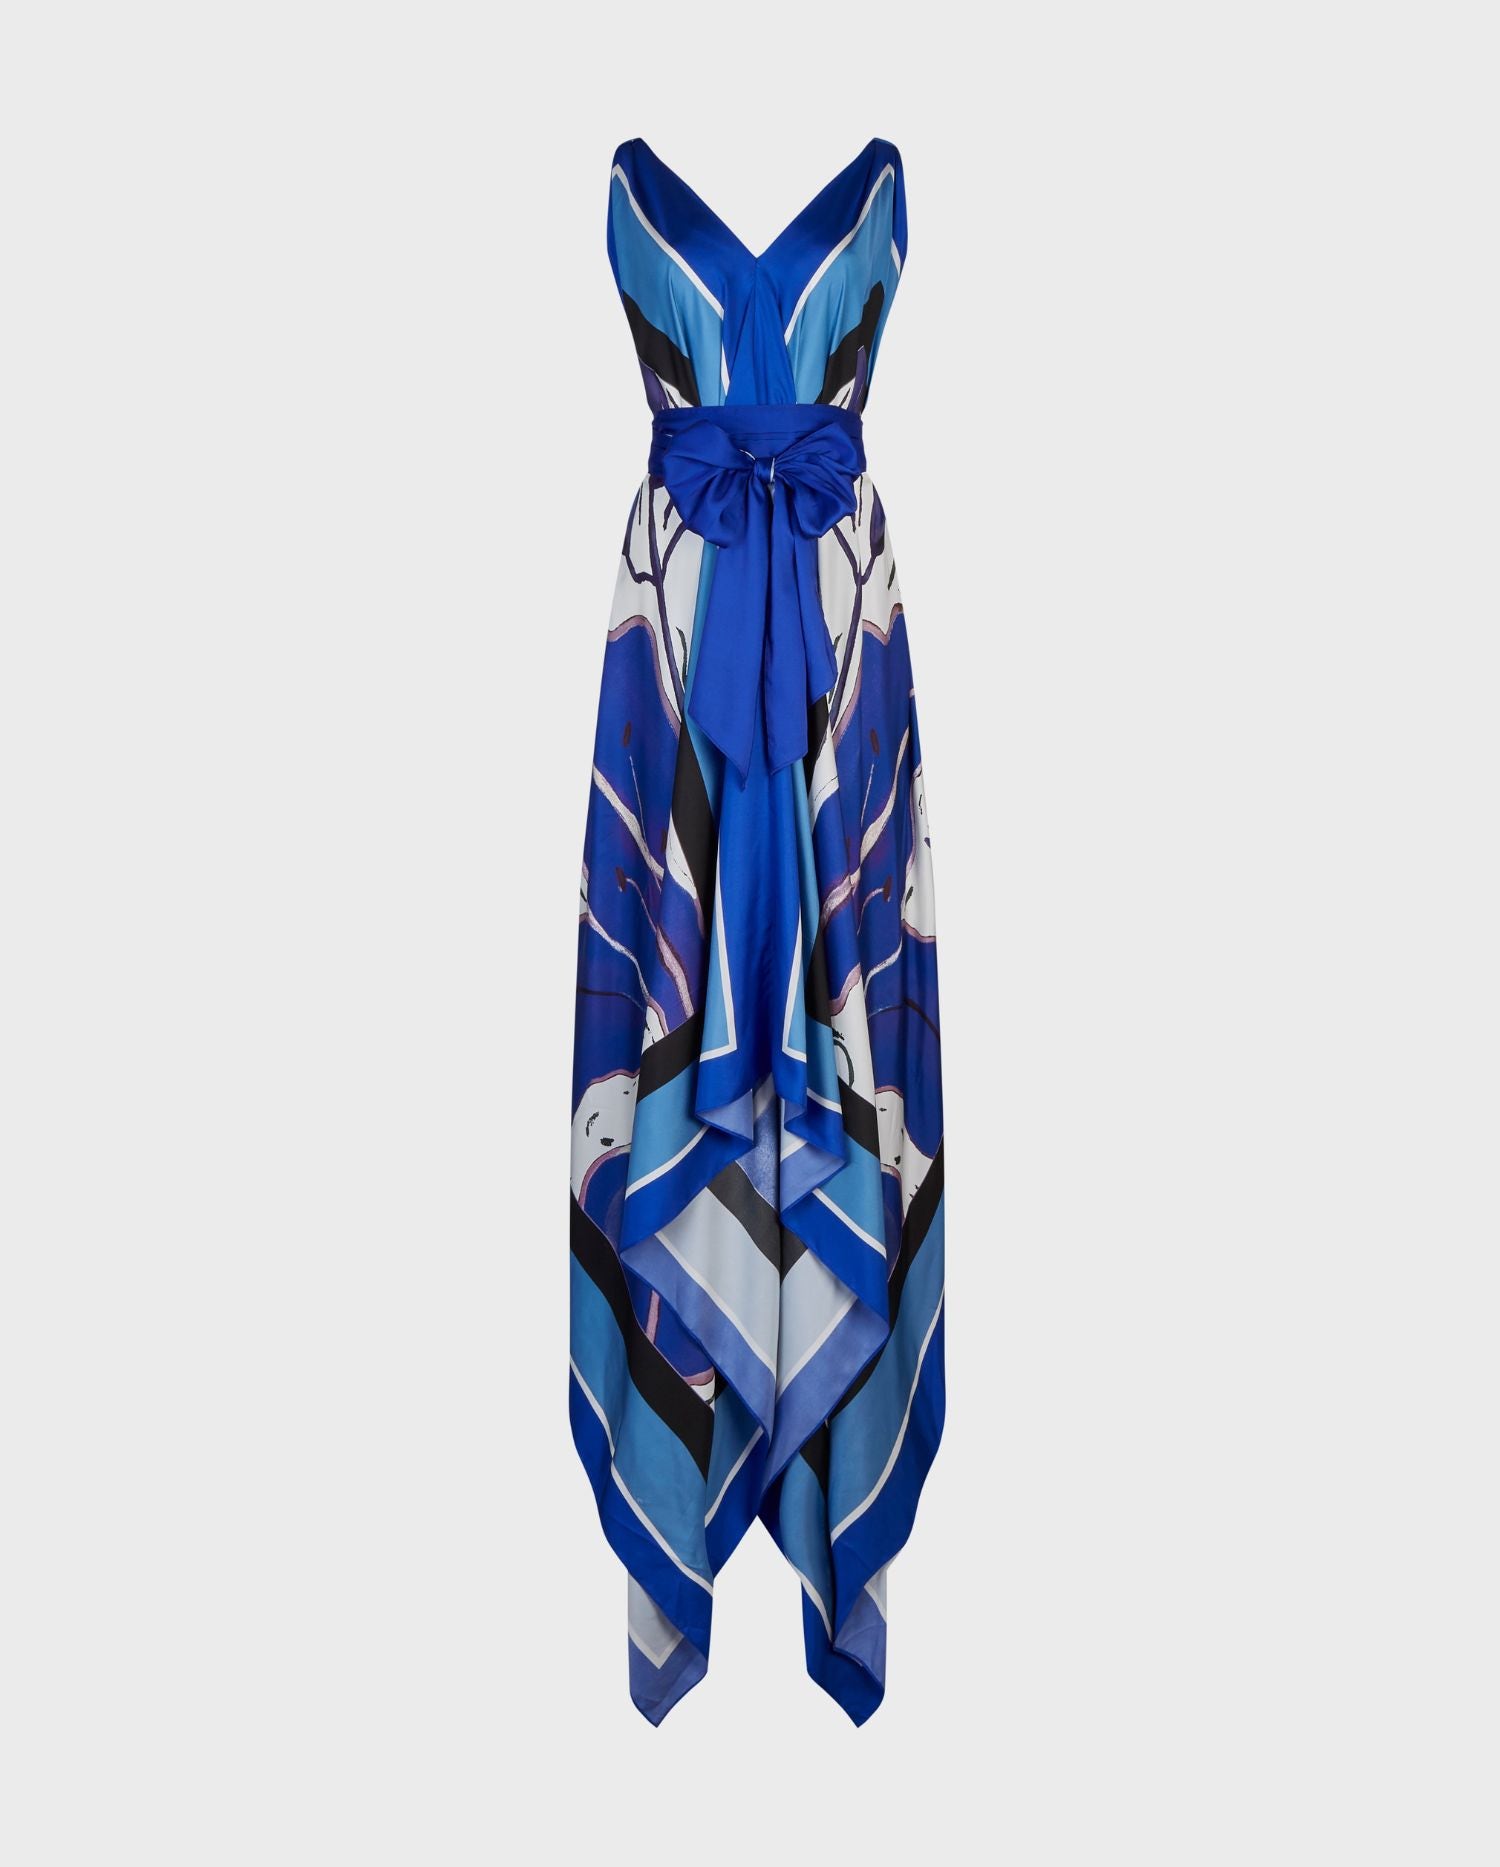 Discover the blue printed silk handkerchief dress SIGNAC from designer ANNE FONTAINE